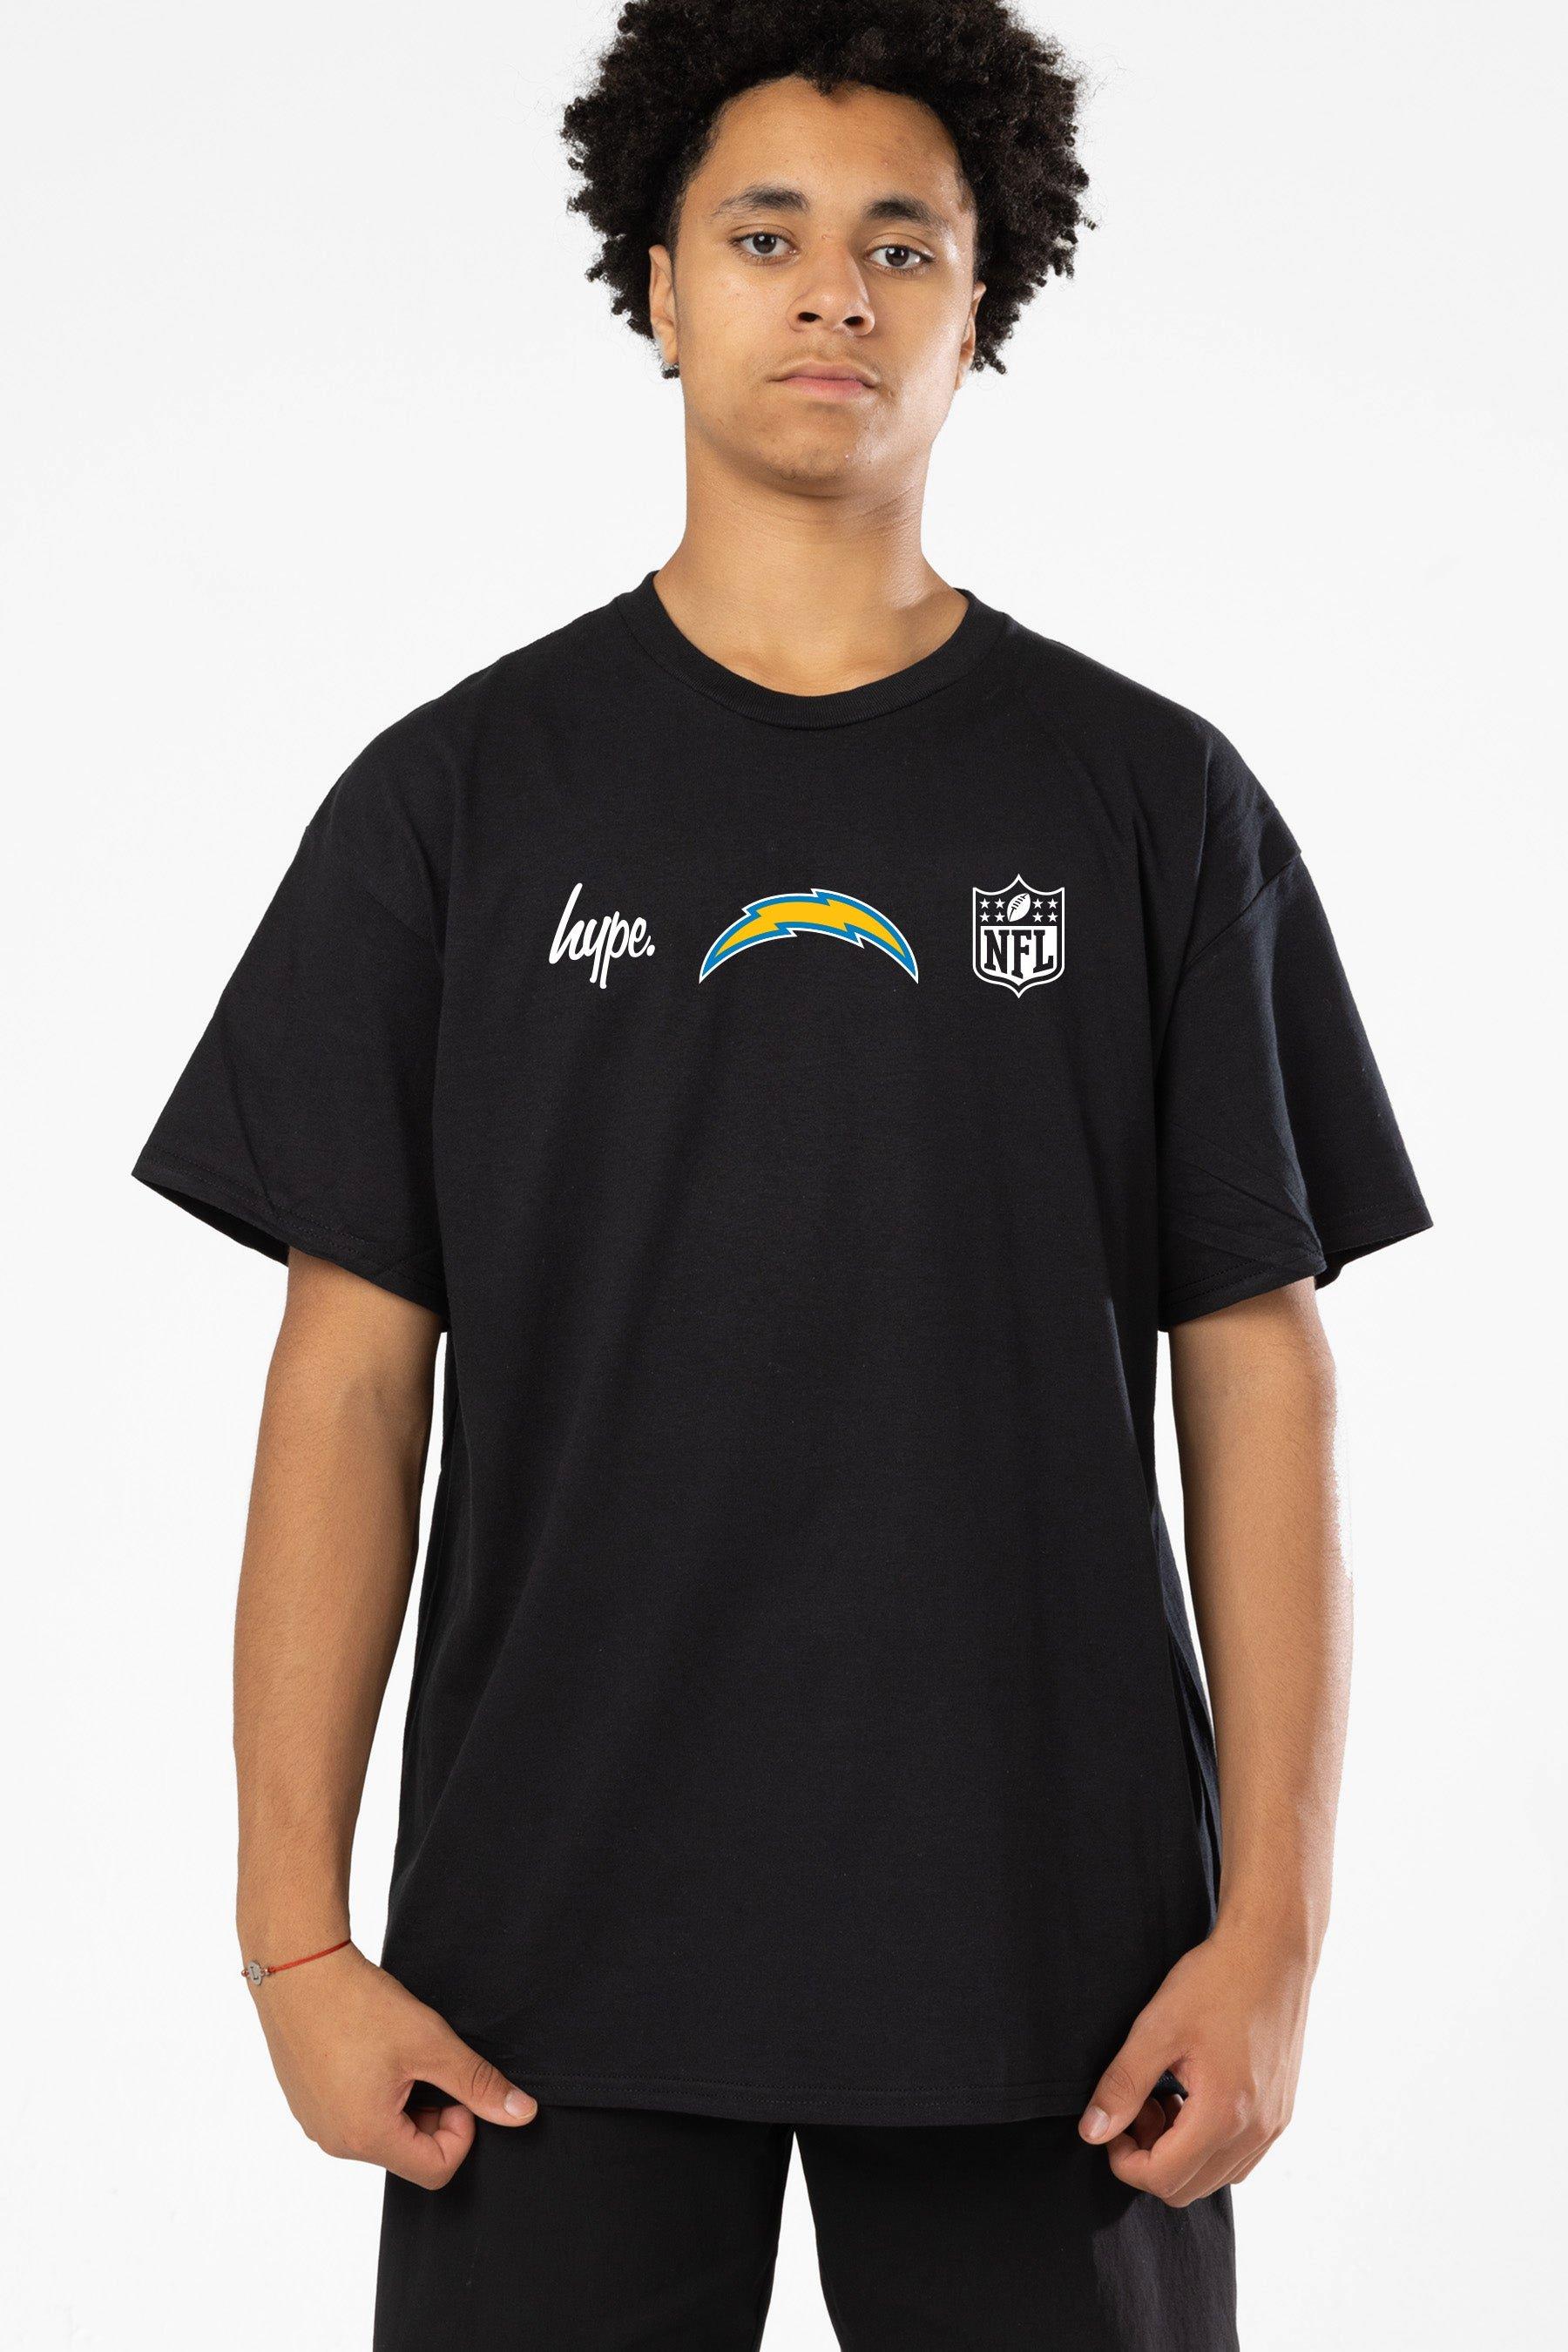 NFL X Los Angeles Chargers T-Shirt